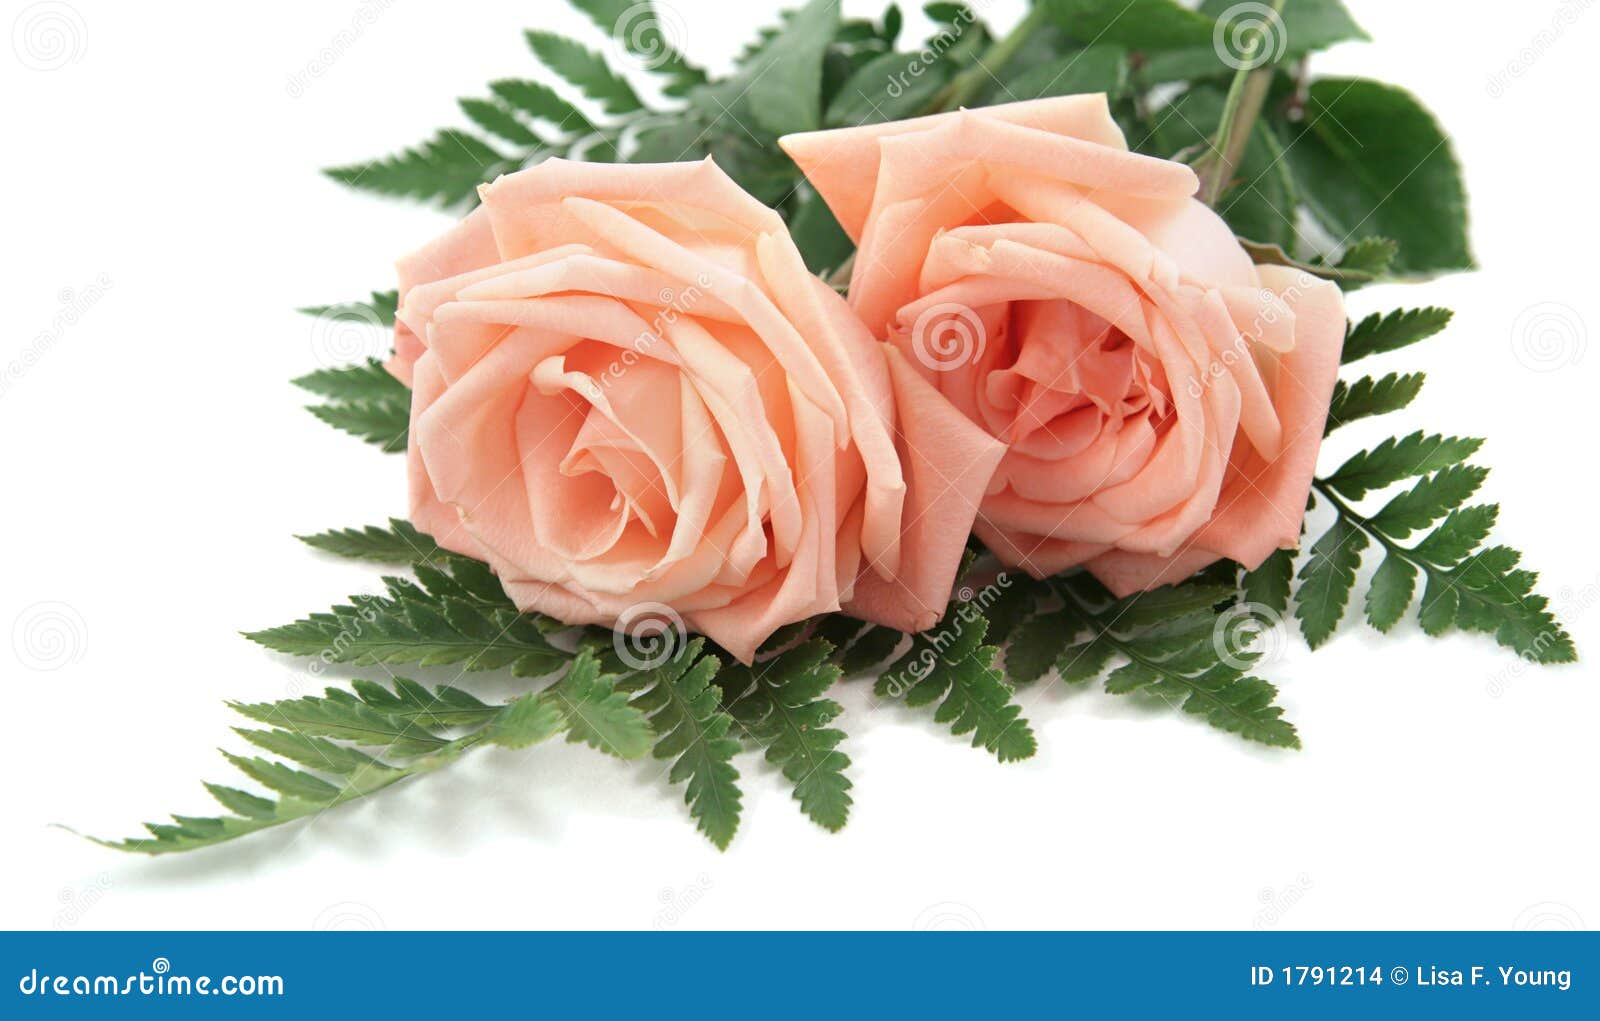 Pink Roses Background On White Stock Images - Image: 1791214